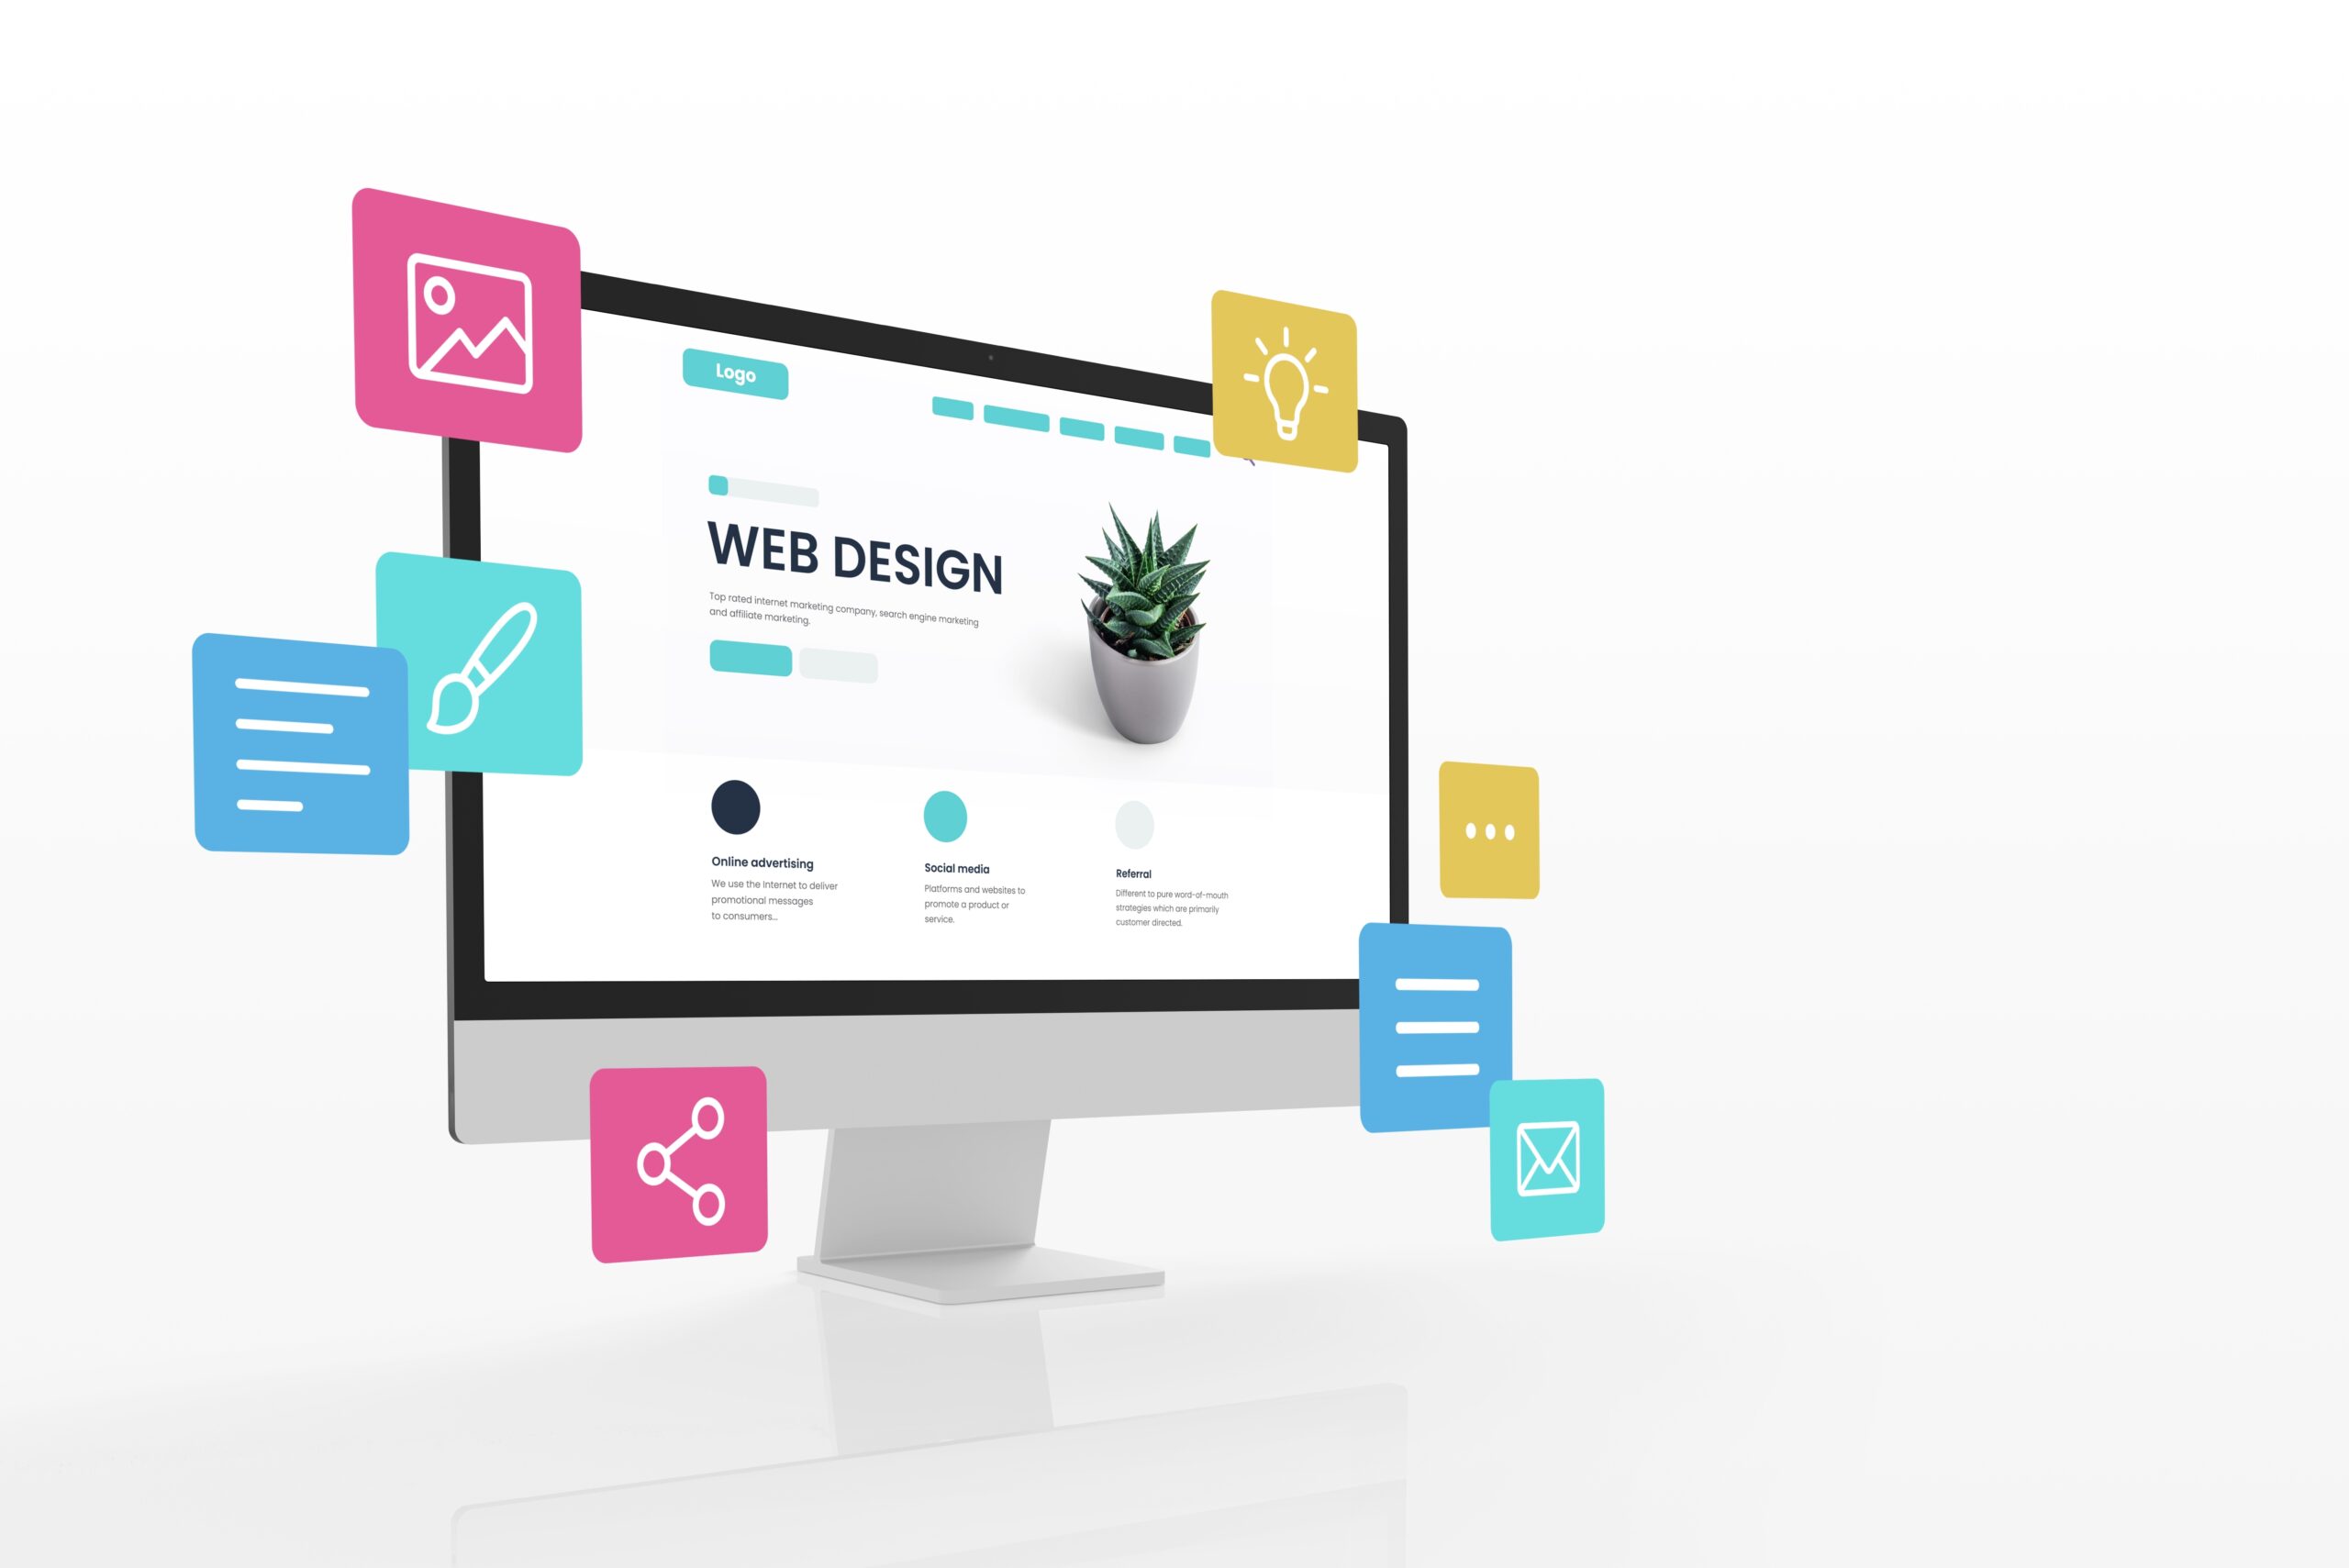 5 Tips For A Great Landing Page From A Website Design Agency